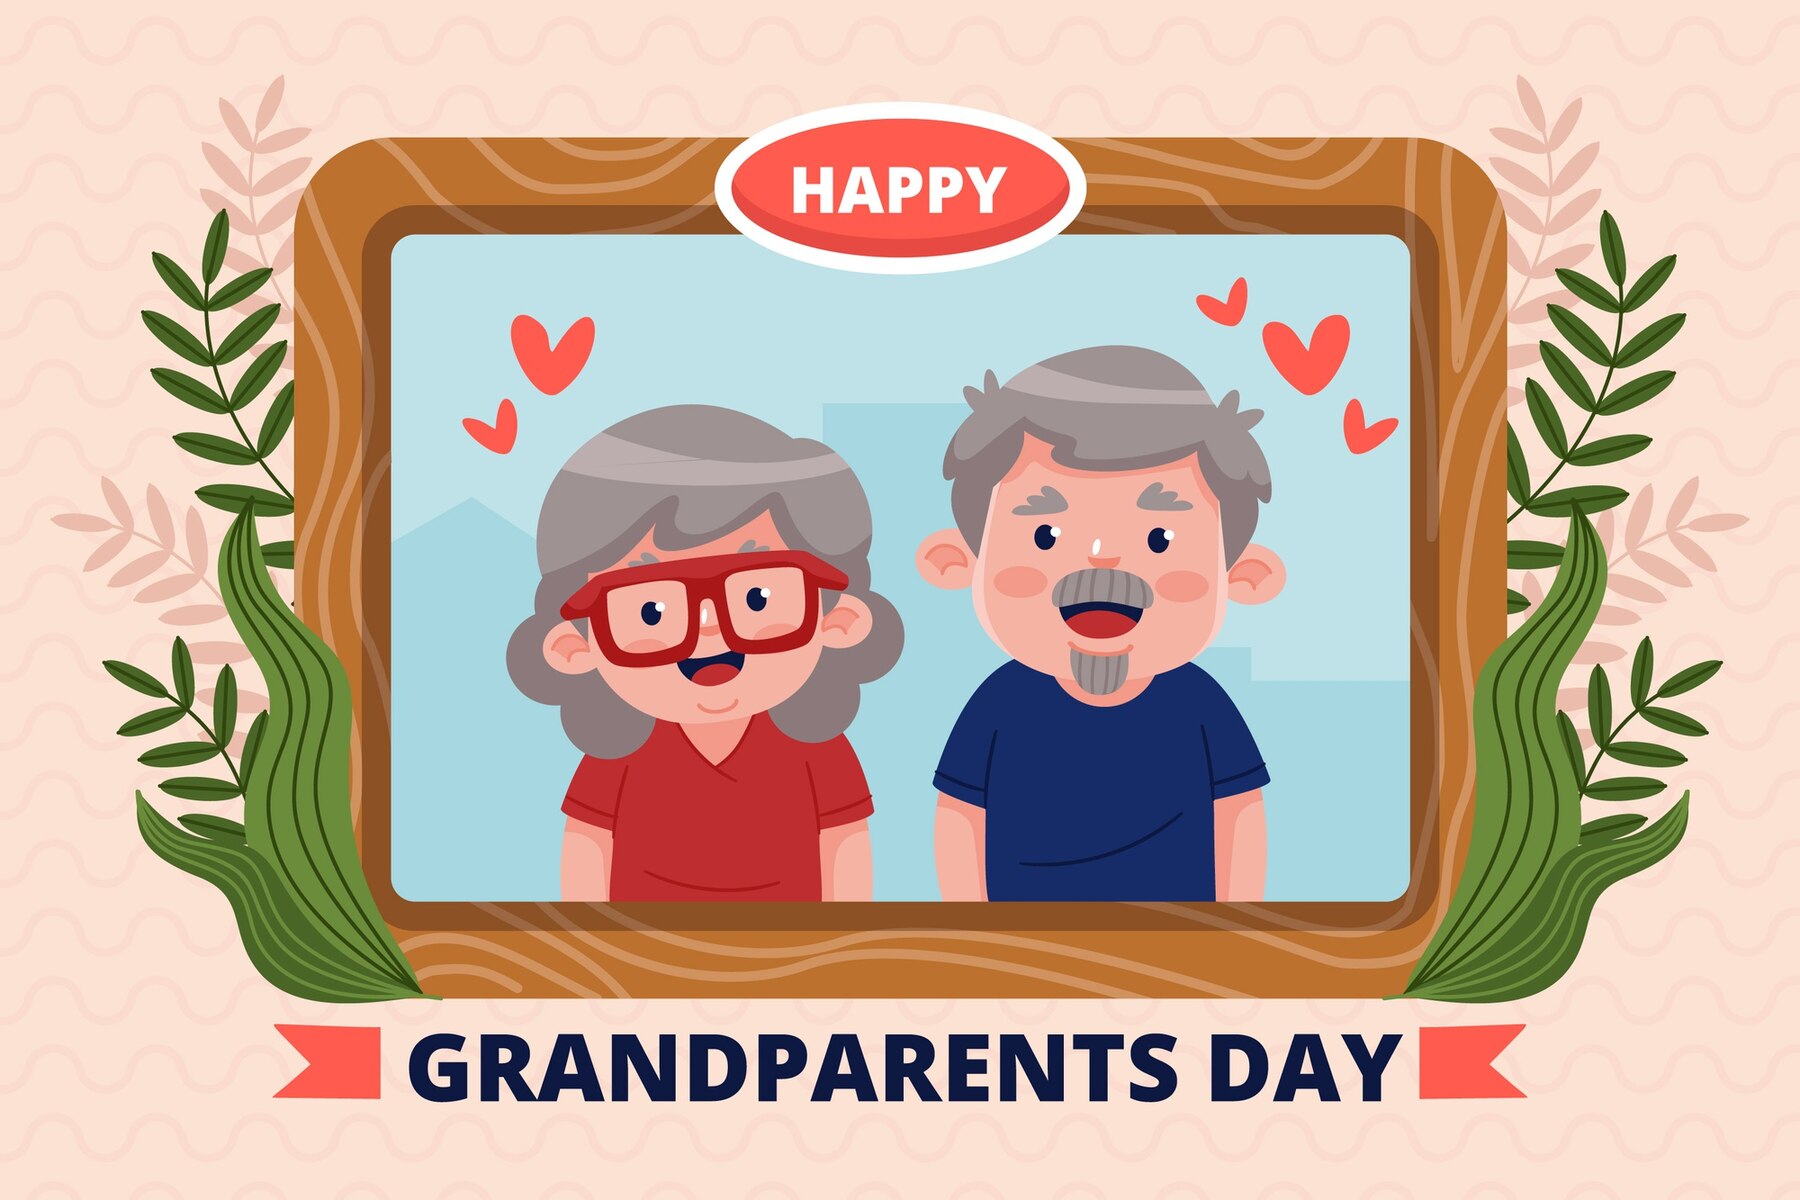 When Is Grandparent's Day?